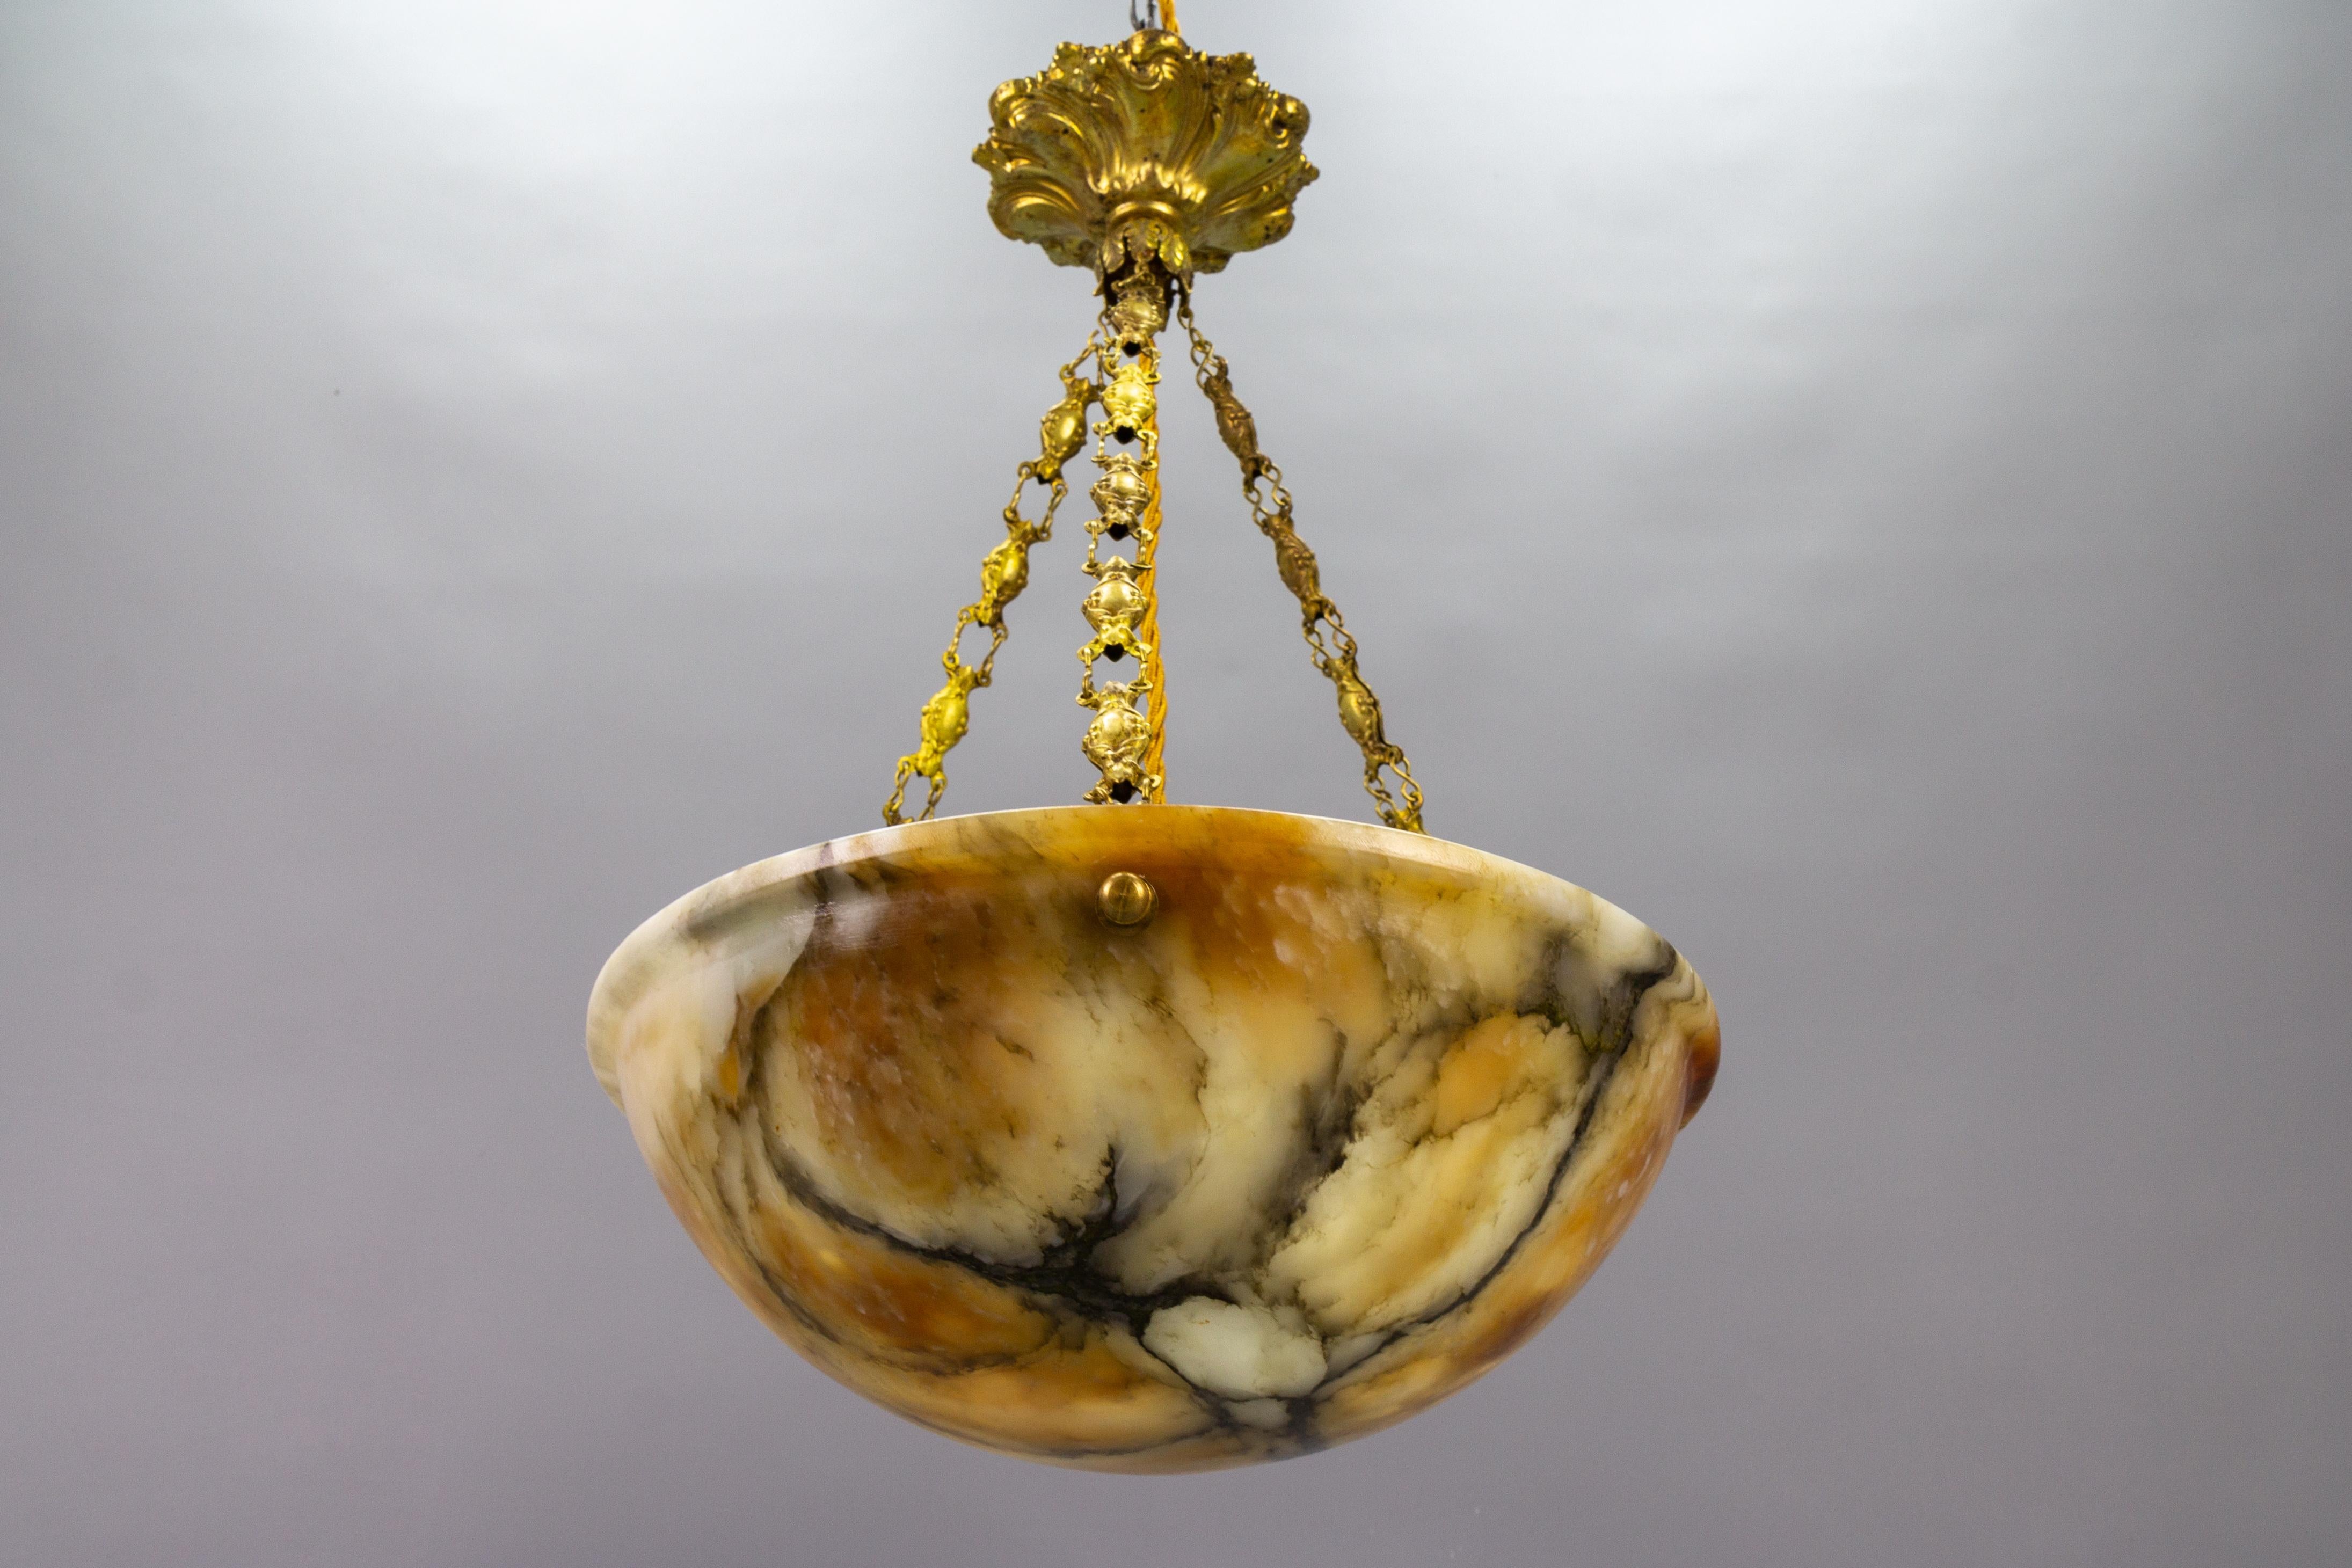 An adorable French pendant light featuring an alabaster shade in a lovely, light and a dark, orange, and cream hue with black veining. The lampshade - bowl is suspended from three ornate brass chains. When lit, alabaster emanates a warm, sun-like